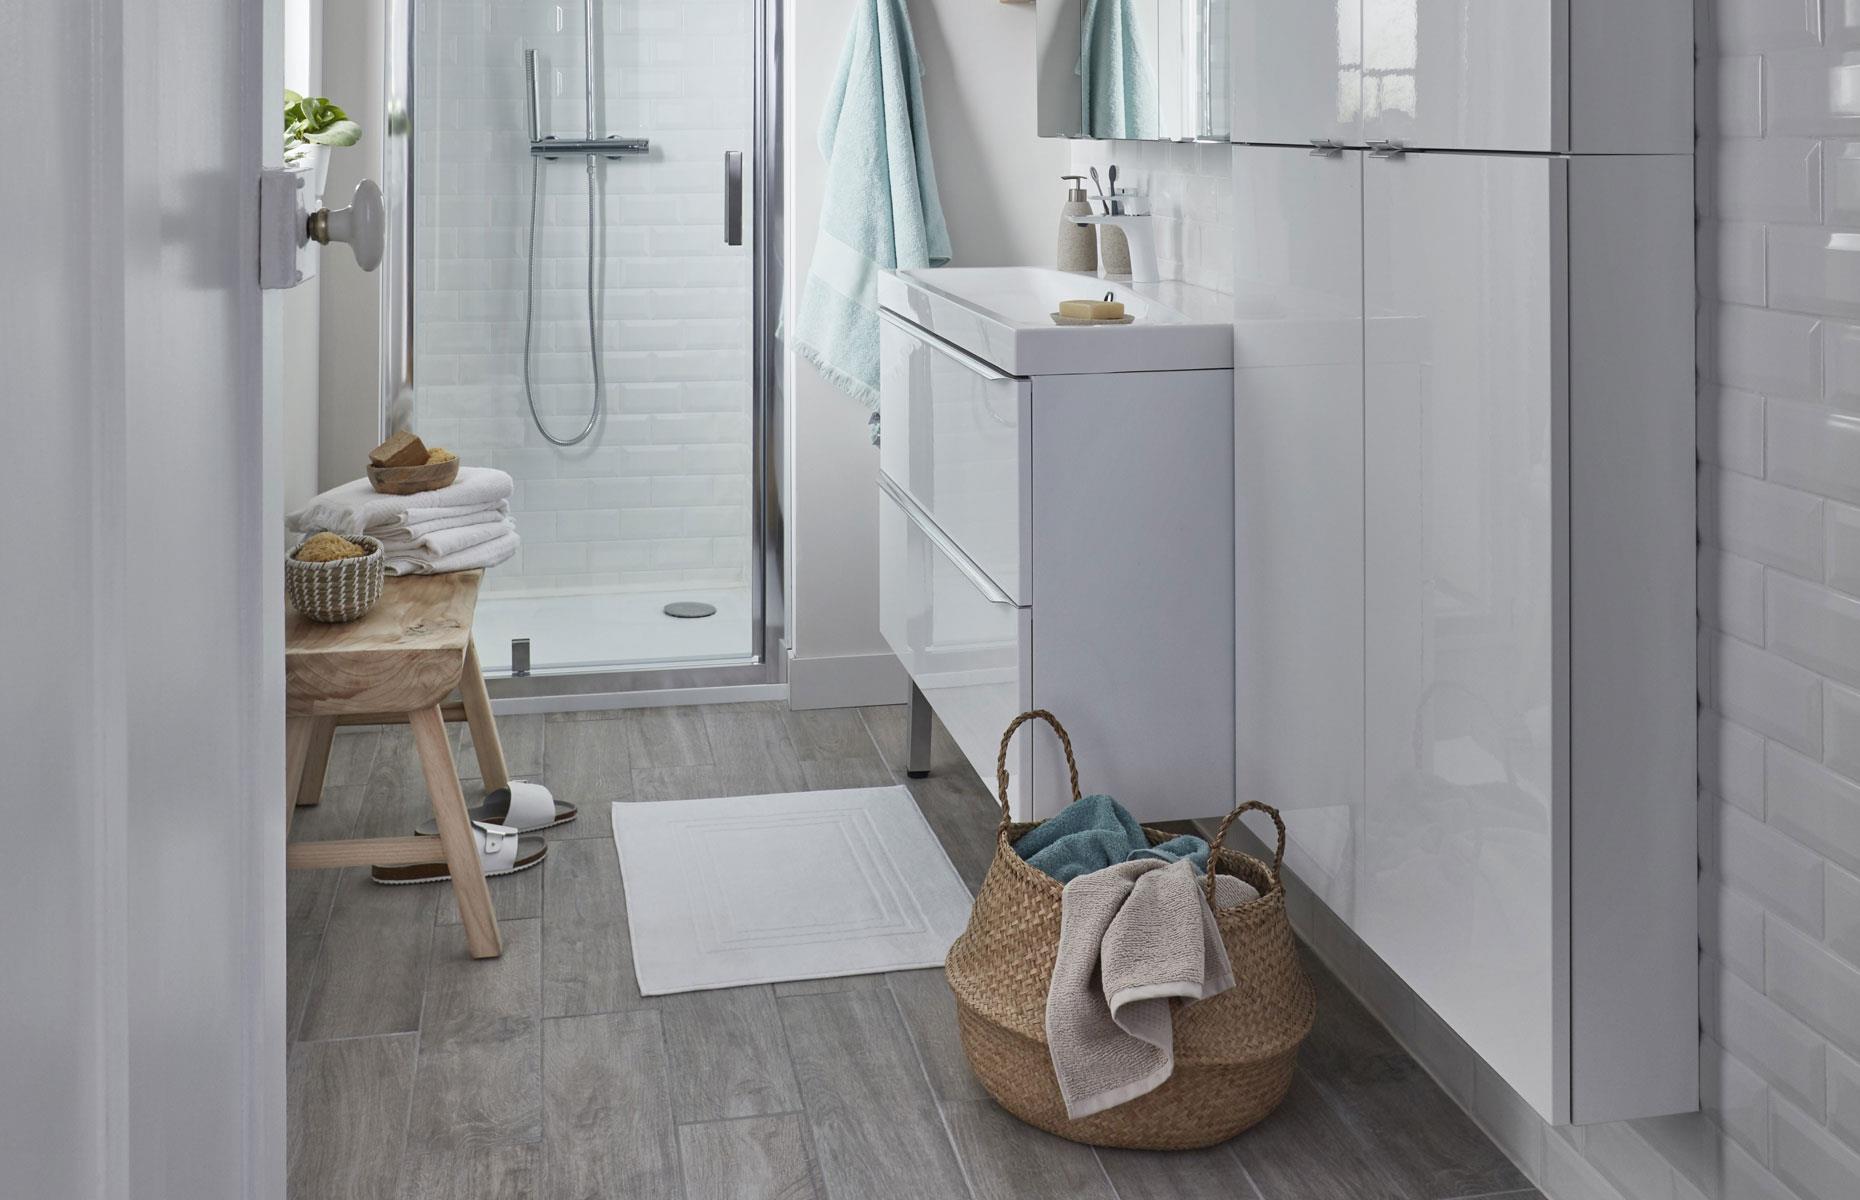 61 Budget Bathroom Ideas To Freshen Up Your Space